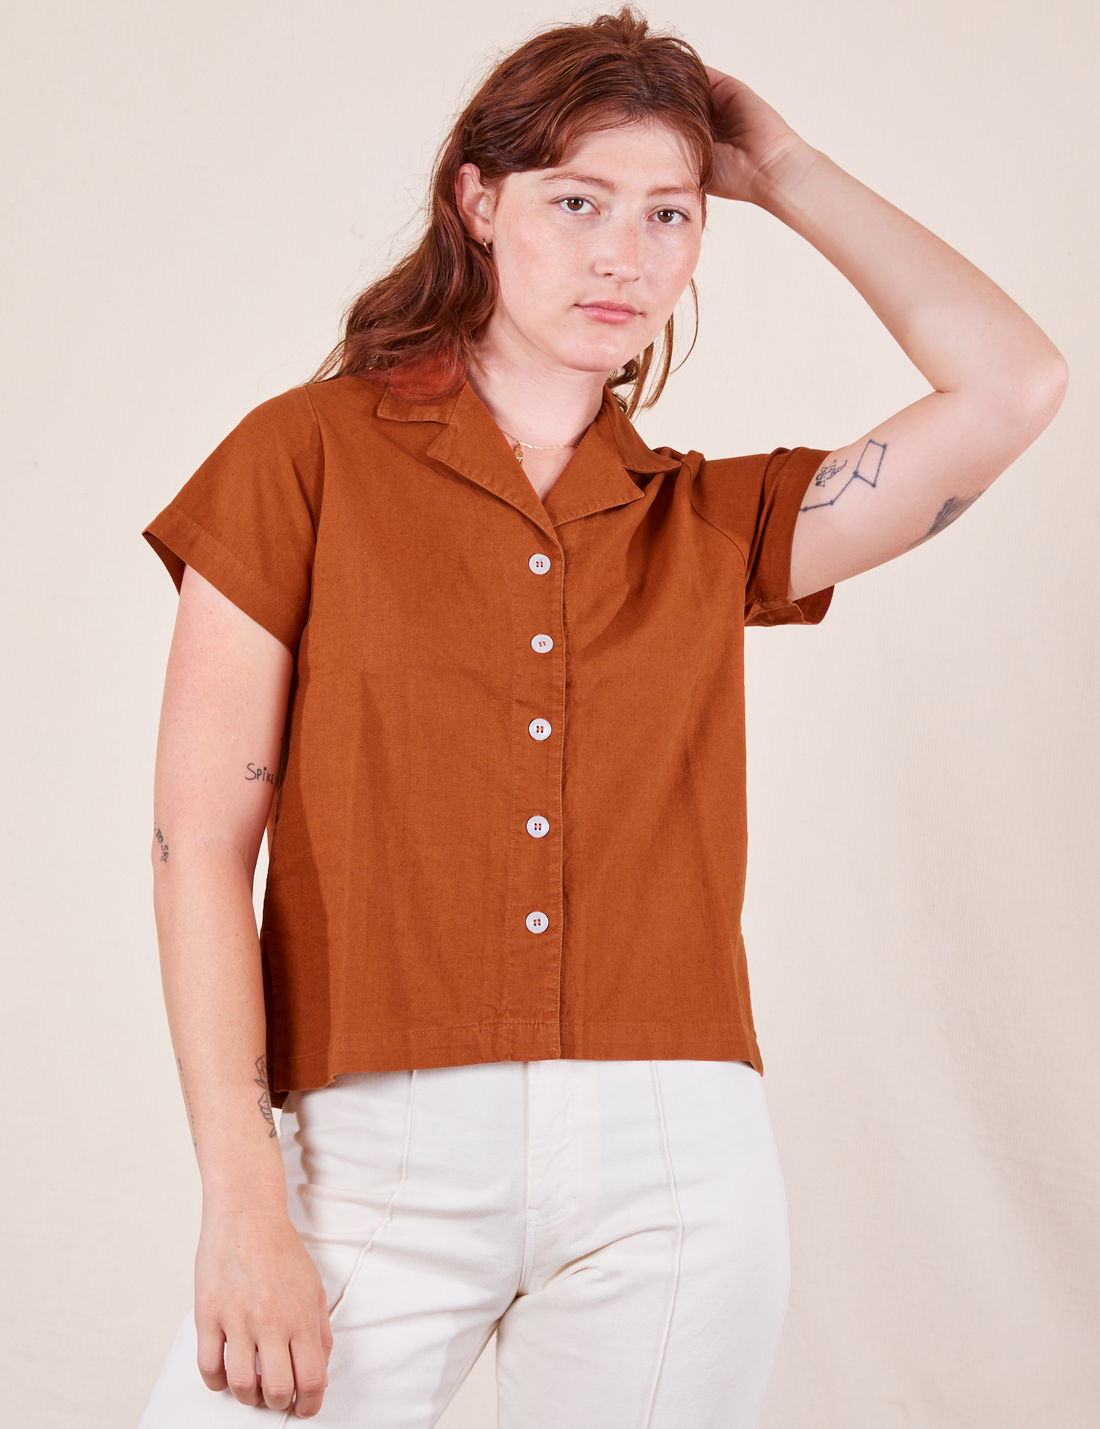 Pantry Button-Up in Burnt Terracotta on Alex wearing vintage off-white Western Pants